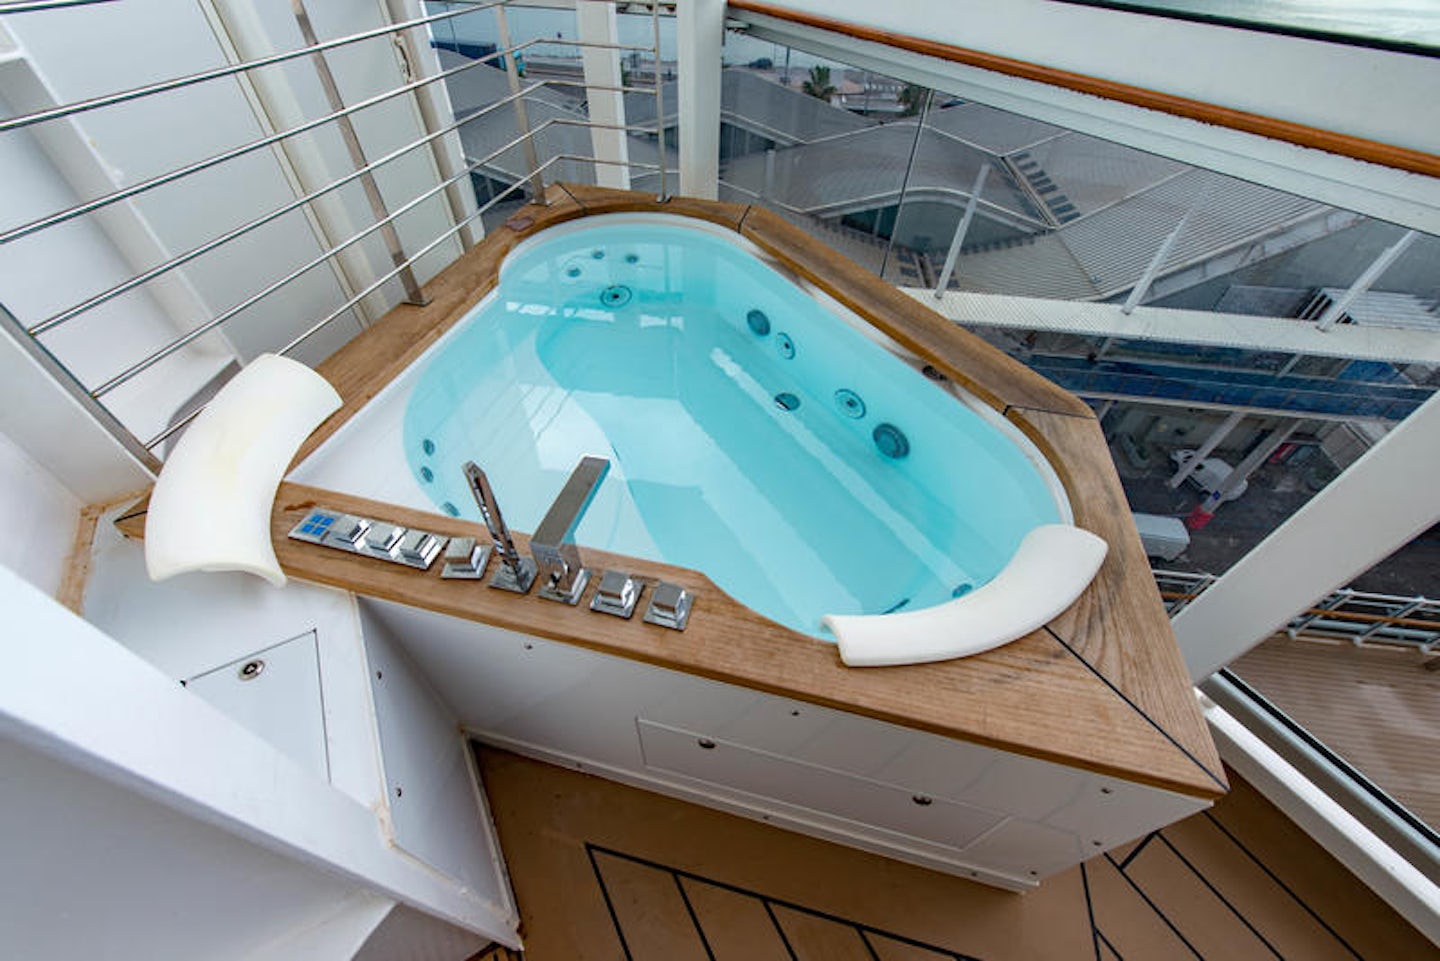 msc yacht club owner's suite with whirlpool bath